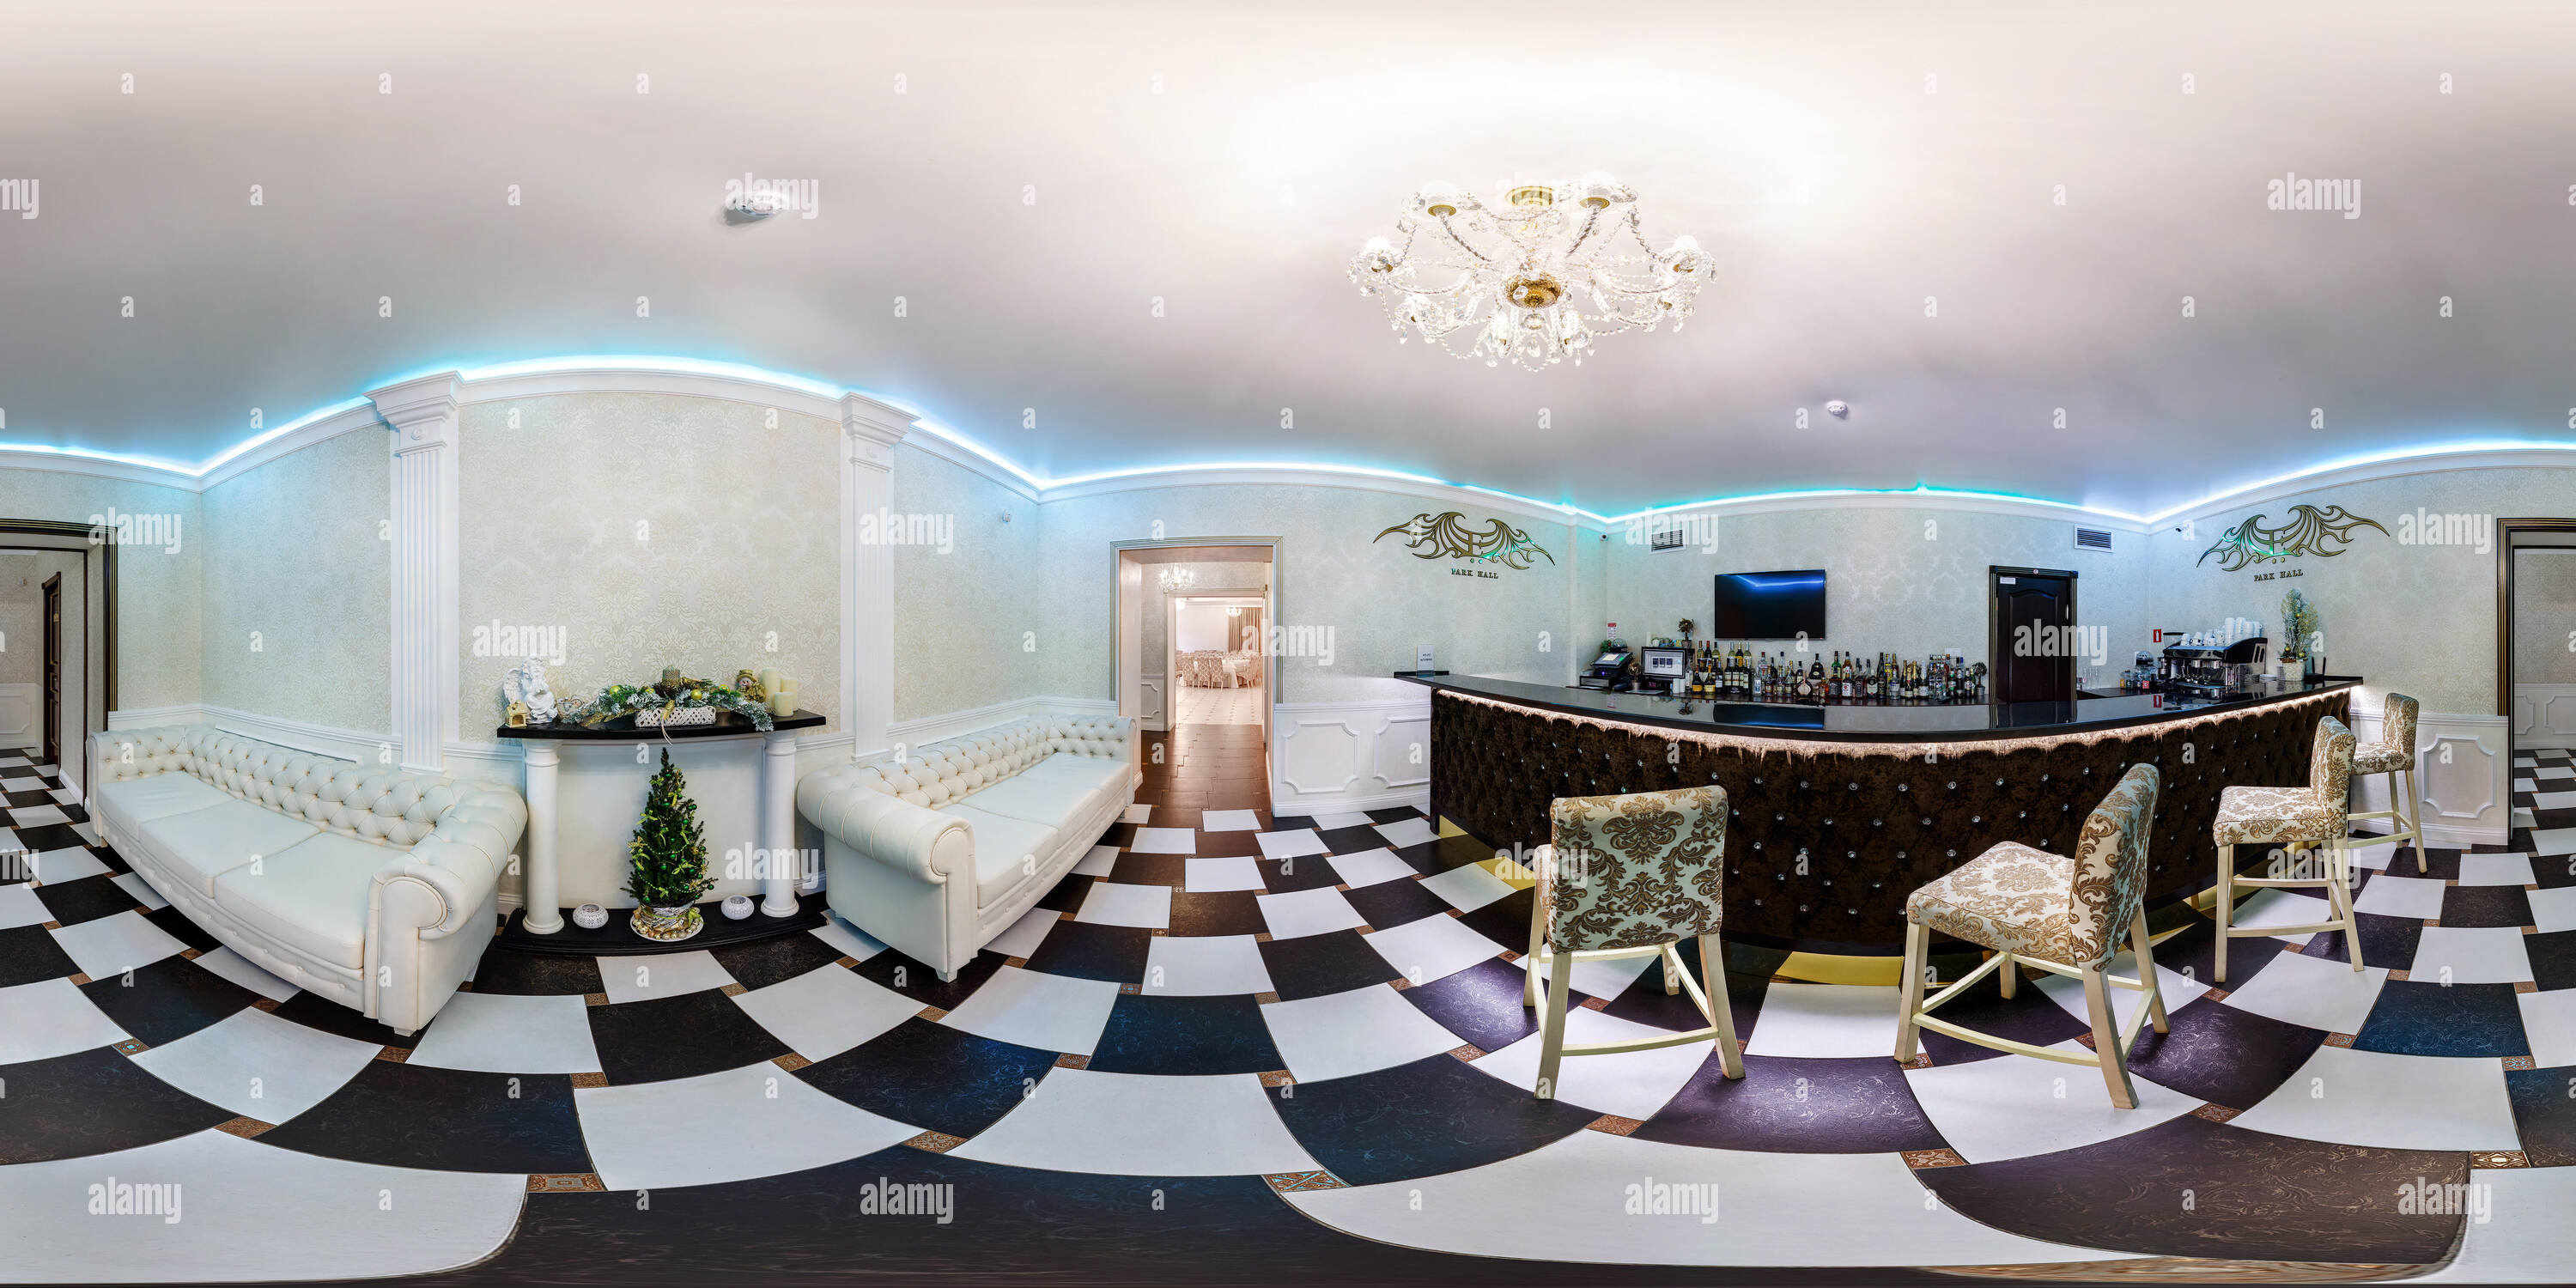 360 degree panoramic view of MINSK, BELARUS - DECEMBER 25, 2014: Full 360 by 180 seamless panorama in equirectangular spherical equidistant projection in interior stylish cafe. Ph